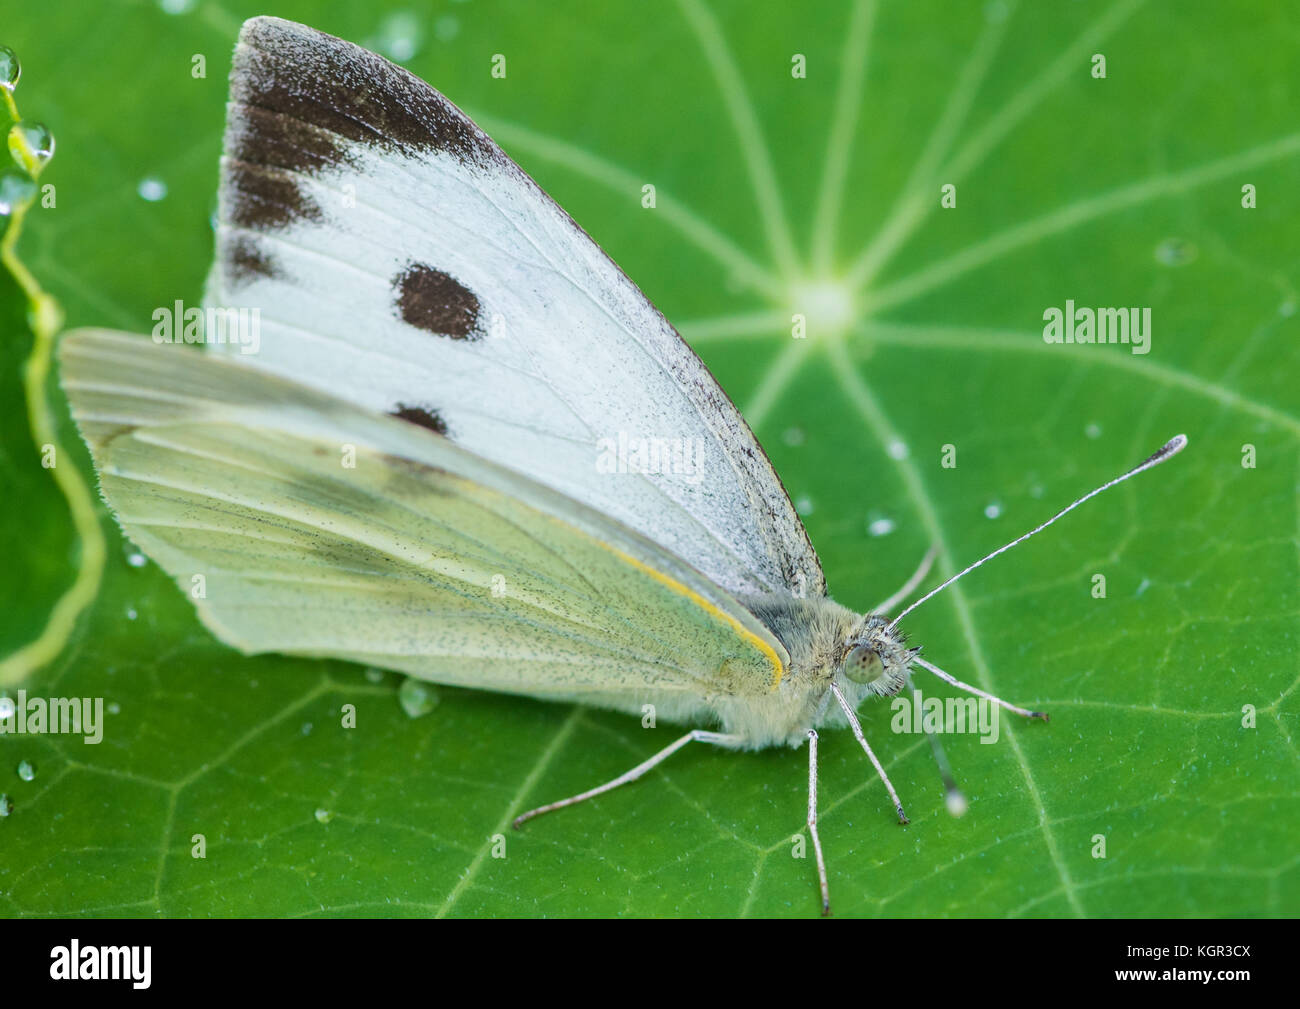 A macro shot of a large white butterfly sitting on a nasturtium leaf. Stock Photo